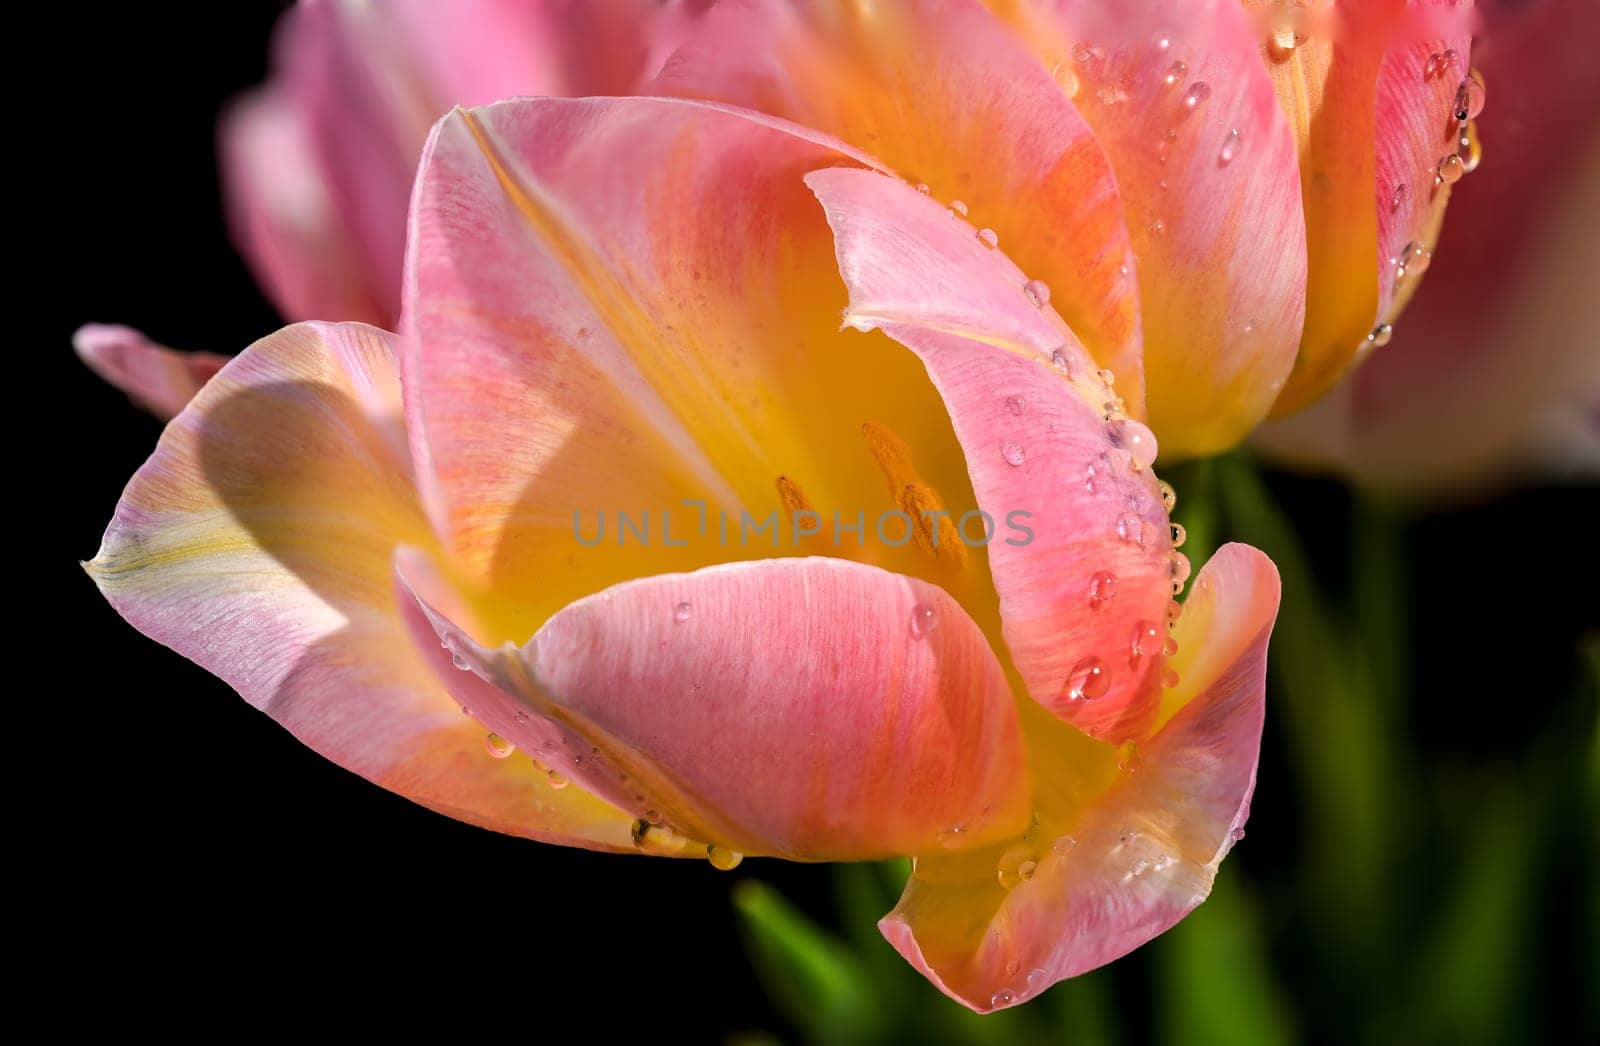 Beautiful blooming pink tulips flowers isolated on a black background. Flower head close-up.